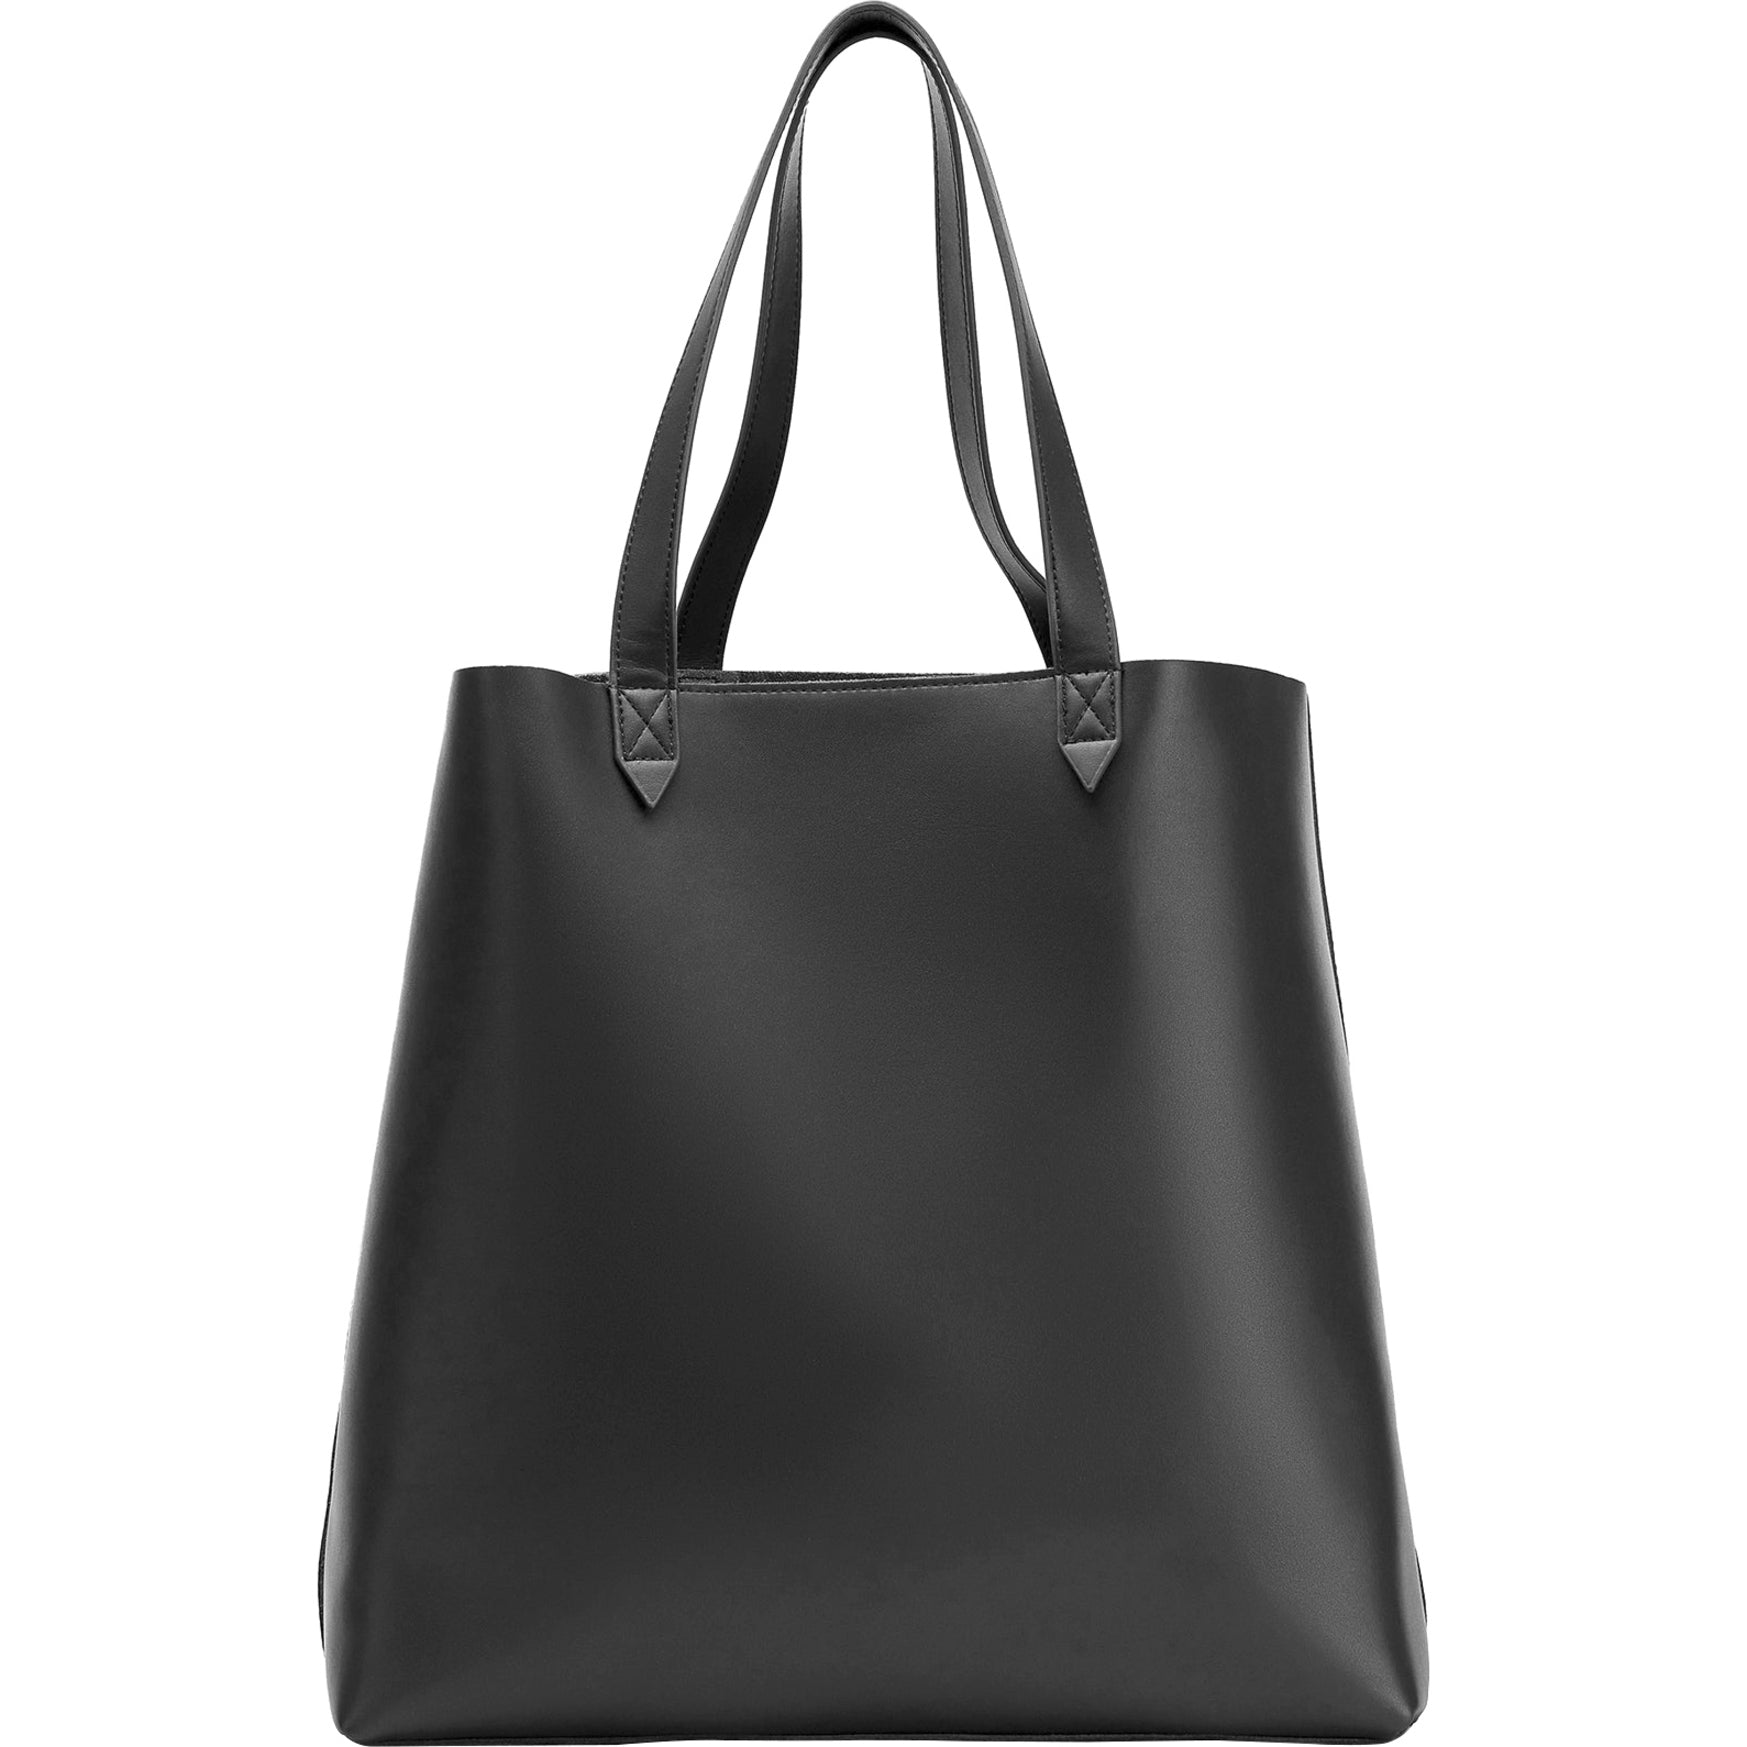 Francine Collection MADE EASY LEATHER TOTE BLACK CARRIES 15IN LAPTOP (FCTBLKMADE)